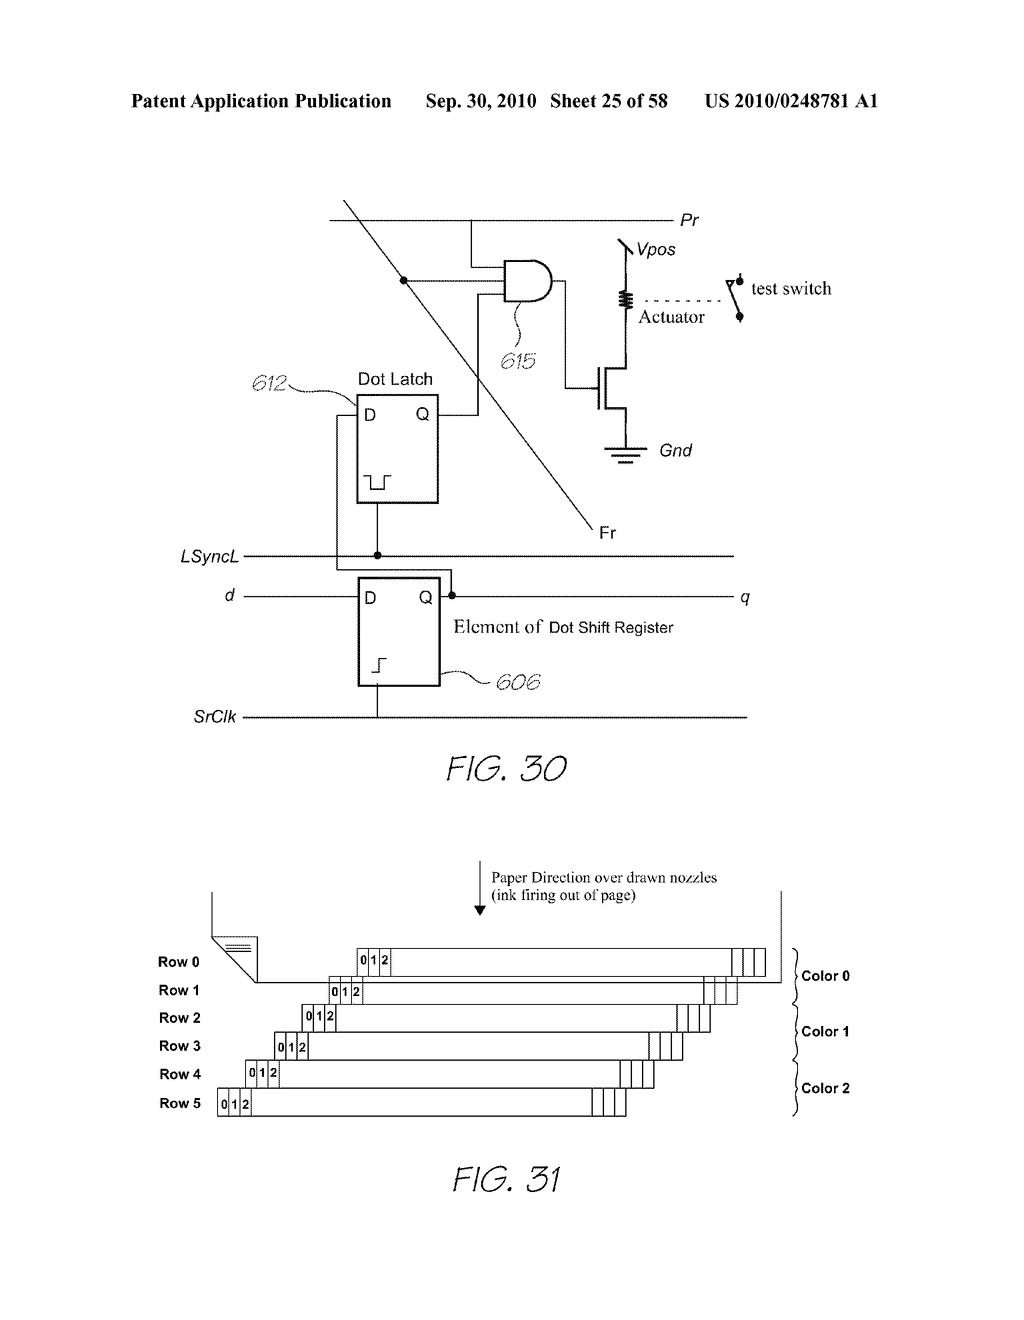 MOBILE TELECOMMUNICATIONS DEVICE WITH IMAGE SENSOR DIRECTED INTERNALLY AND EXTERNALLY - diagram, schematic, and image 26